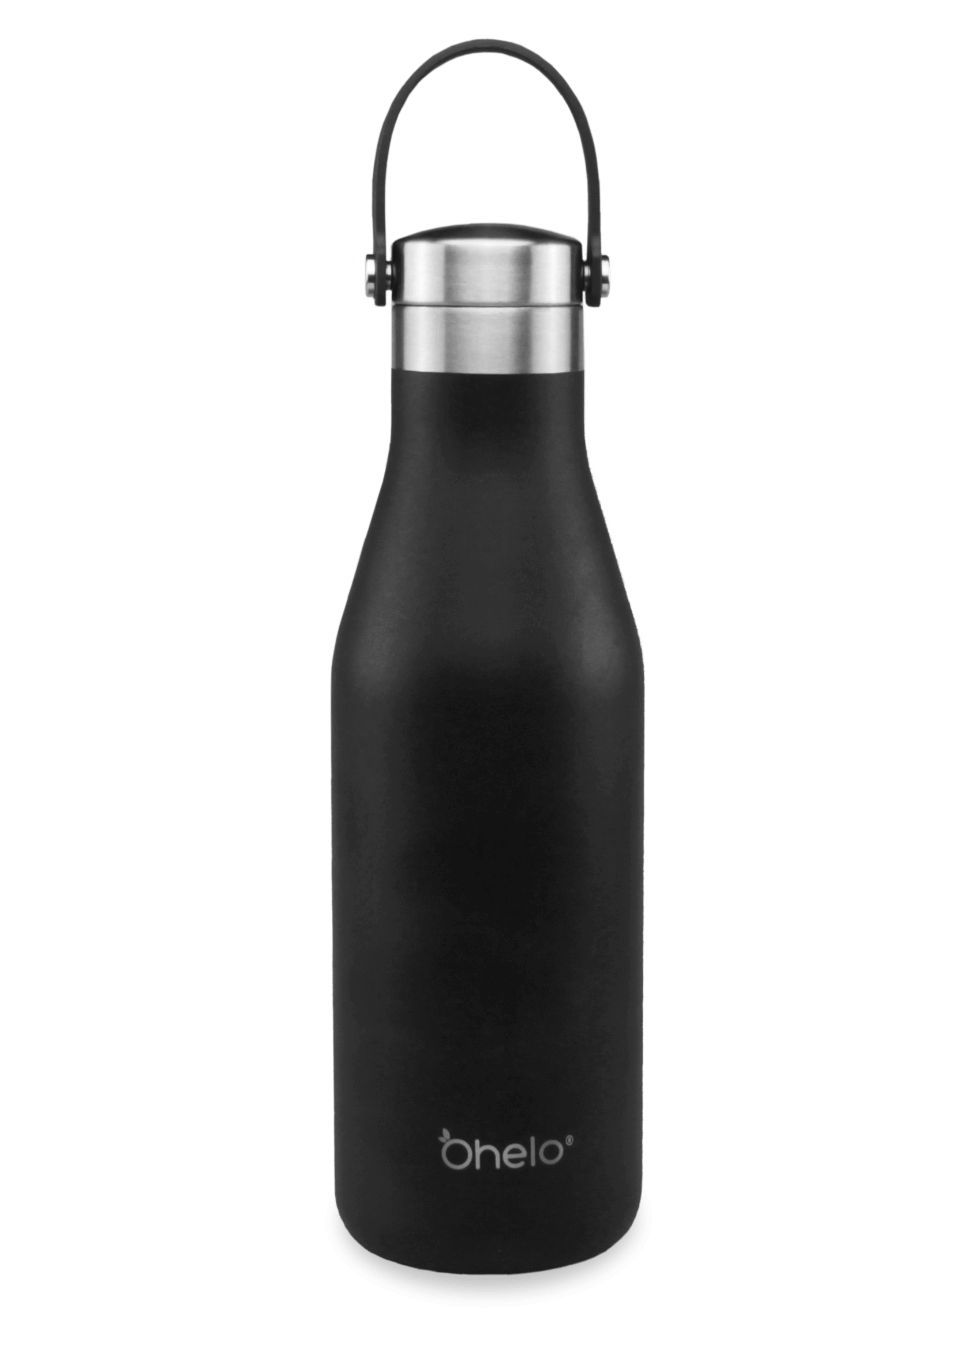 Ohelo reusable stainless steel water bottle black